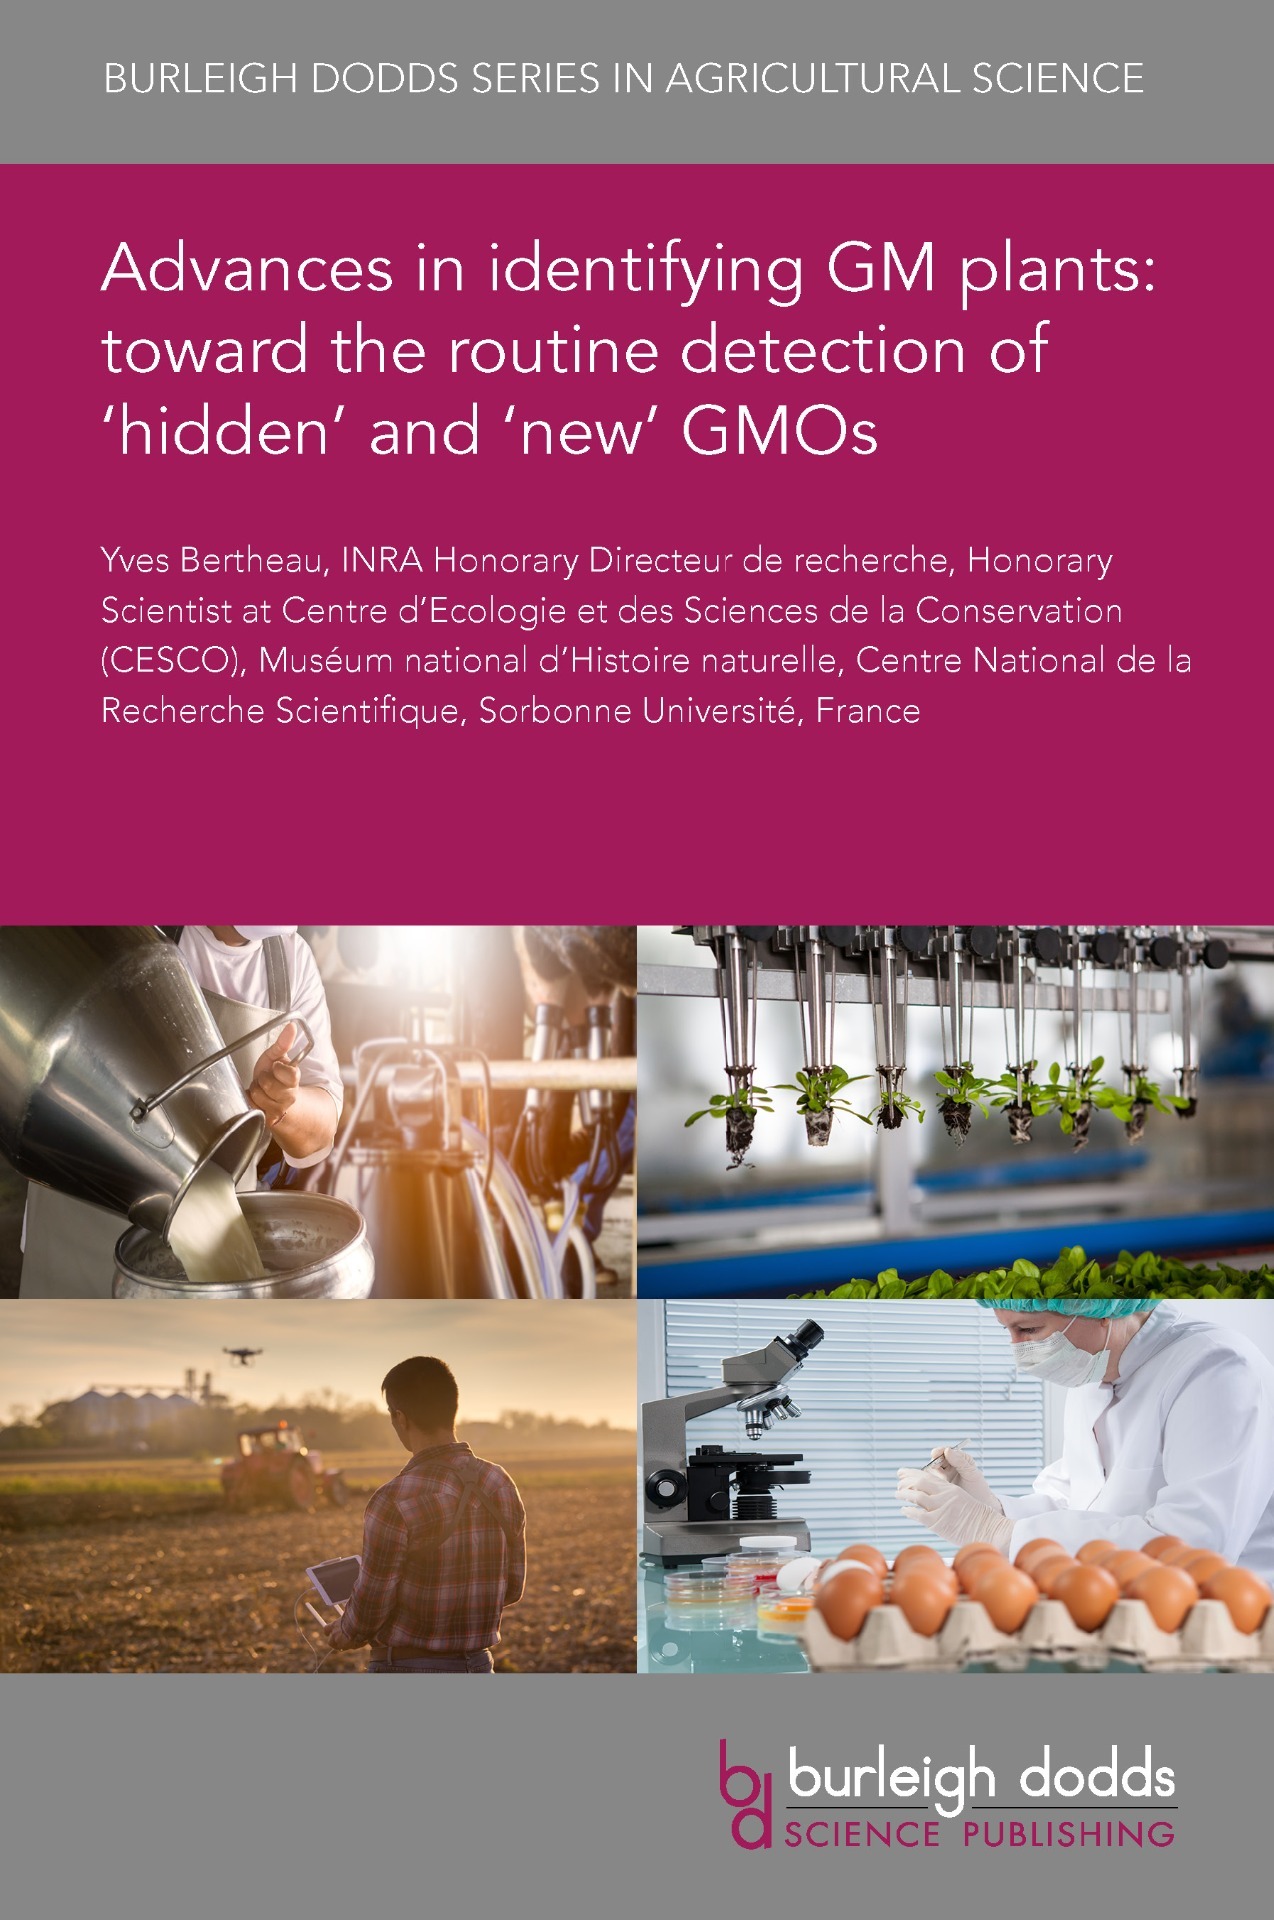 Advances in indentifying GM plants: toward the routine detection of 'hidden' and 'new' GMOs